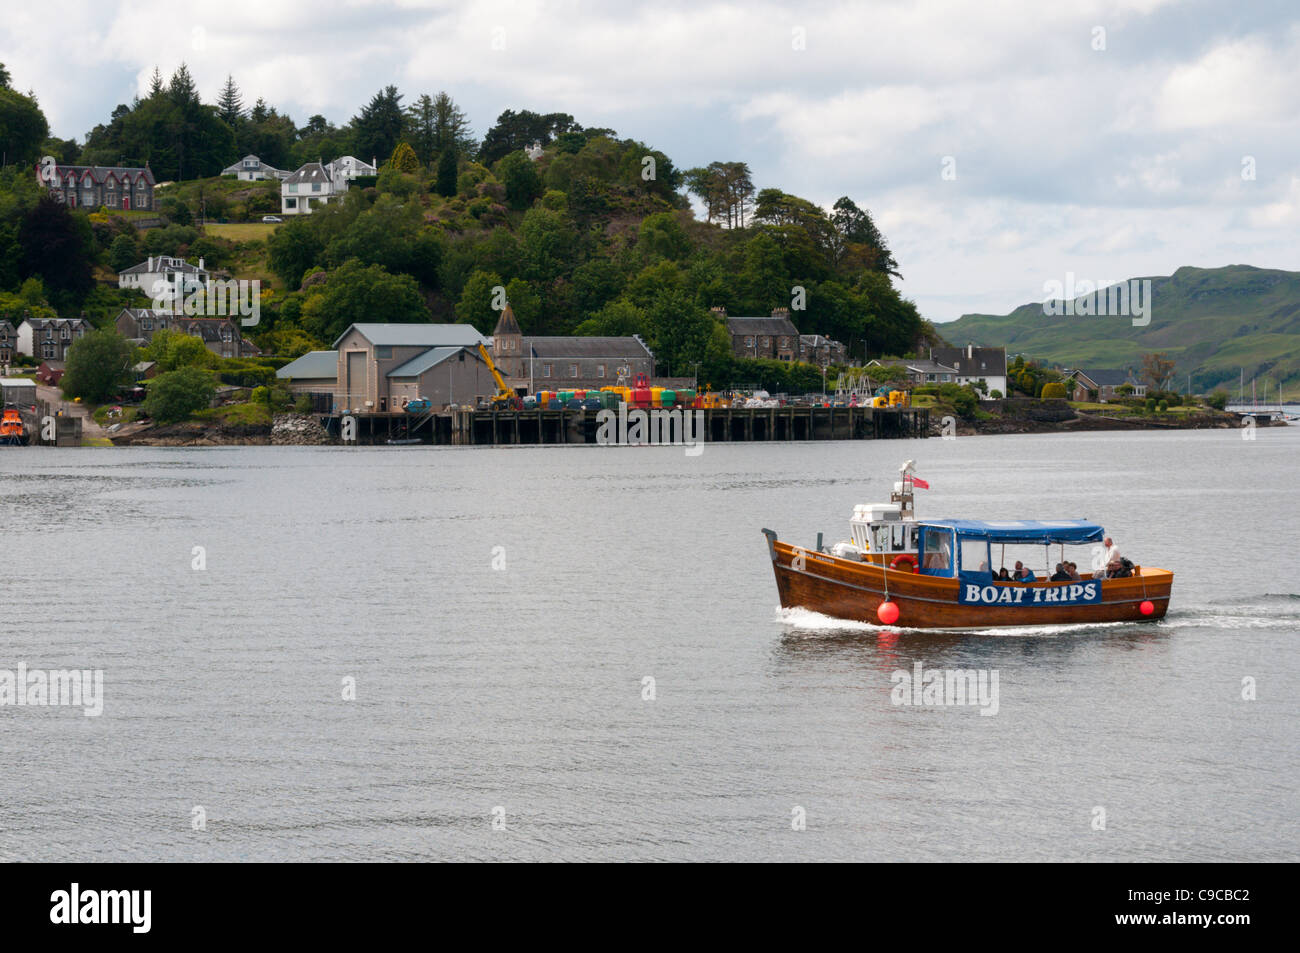 A small boat takes tourists for a trip around the harbour at Oban, Scotland Stock Photo